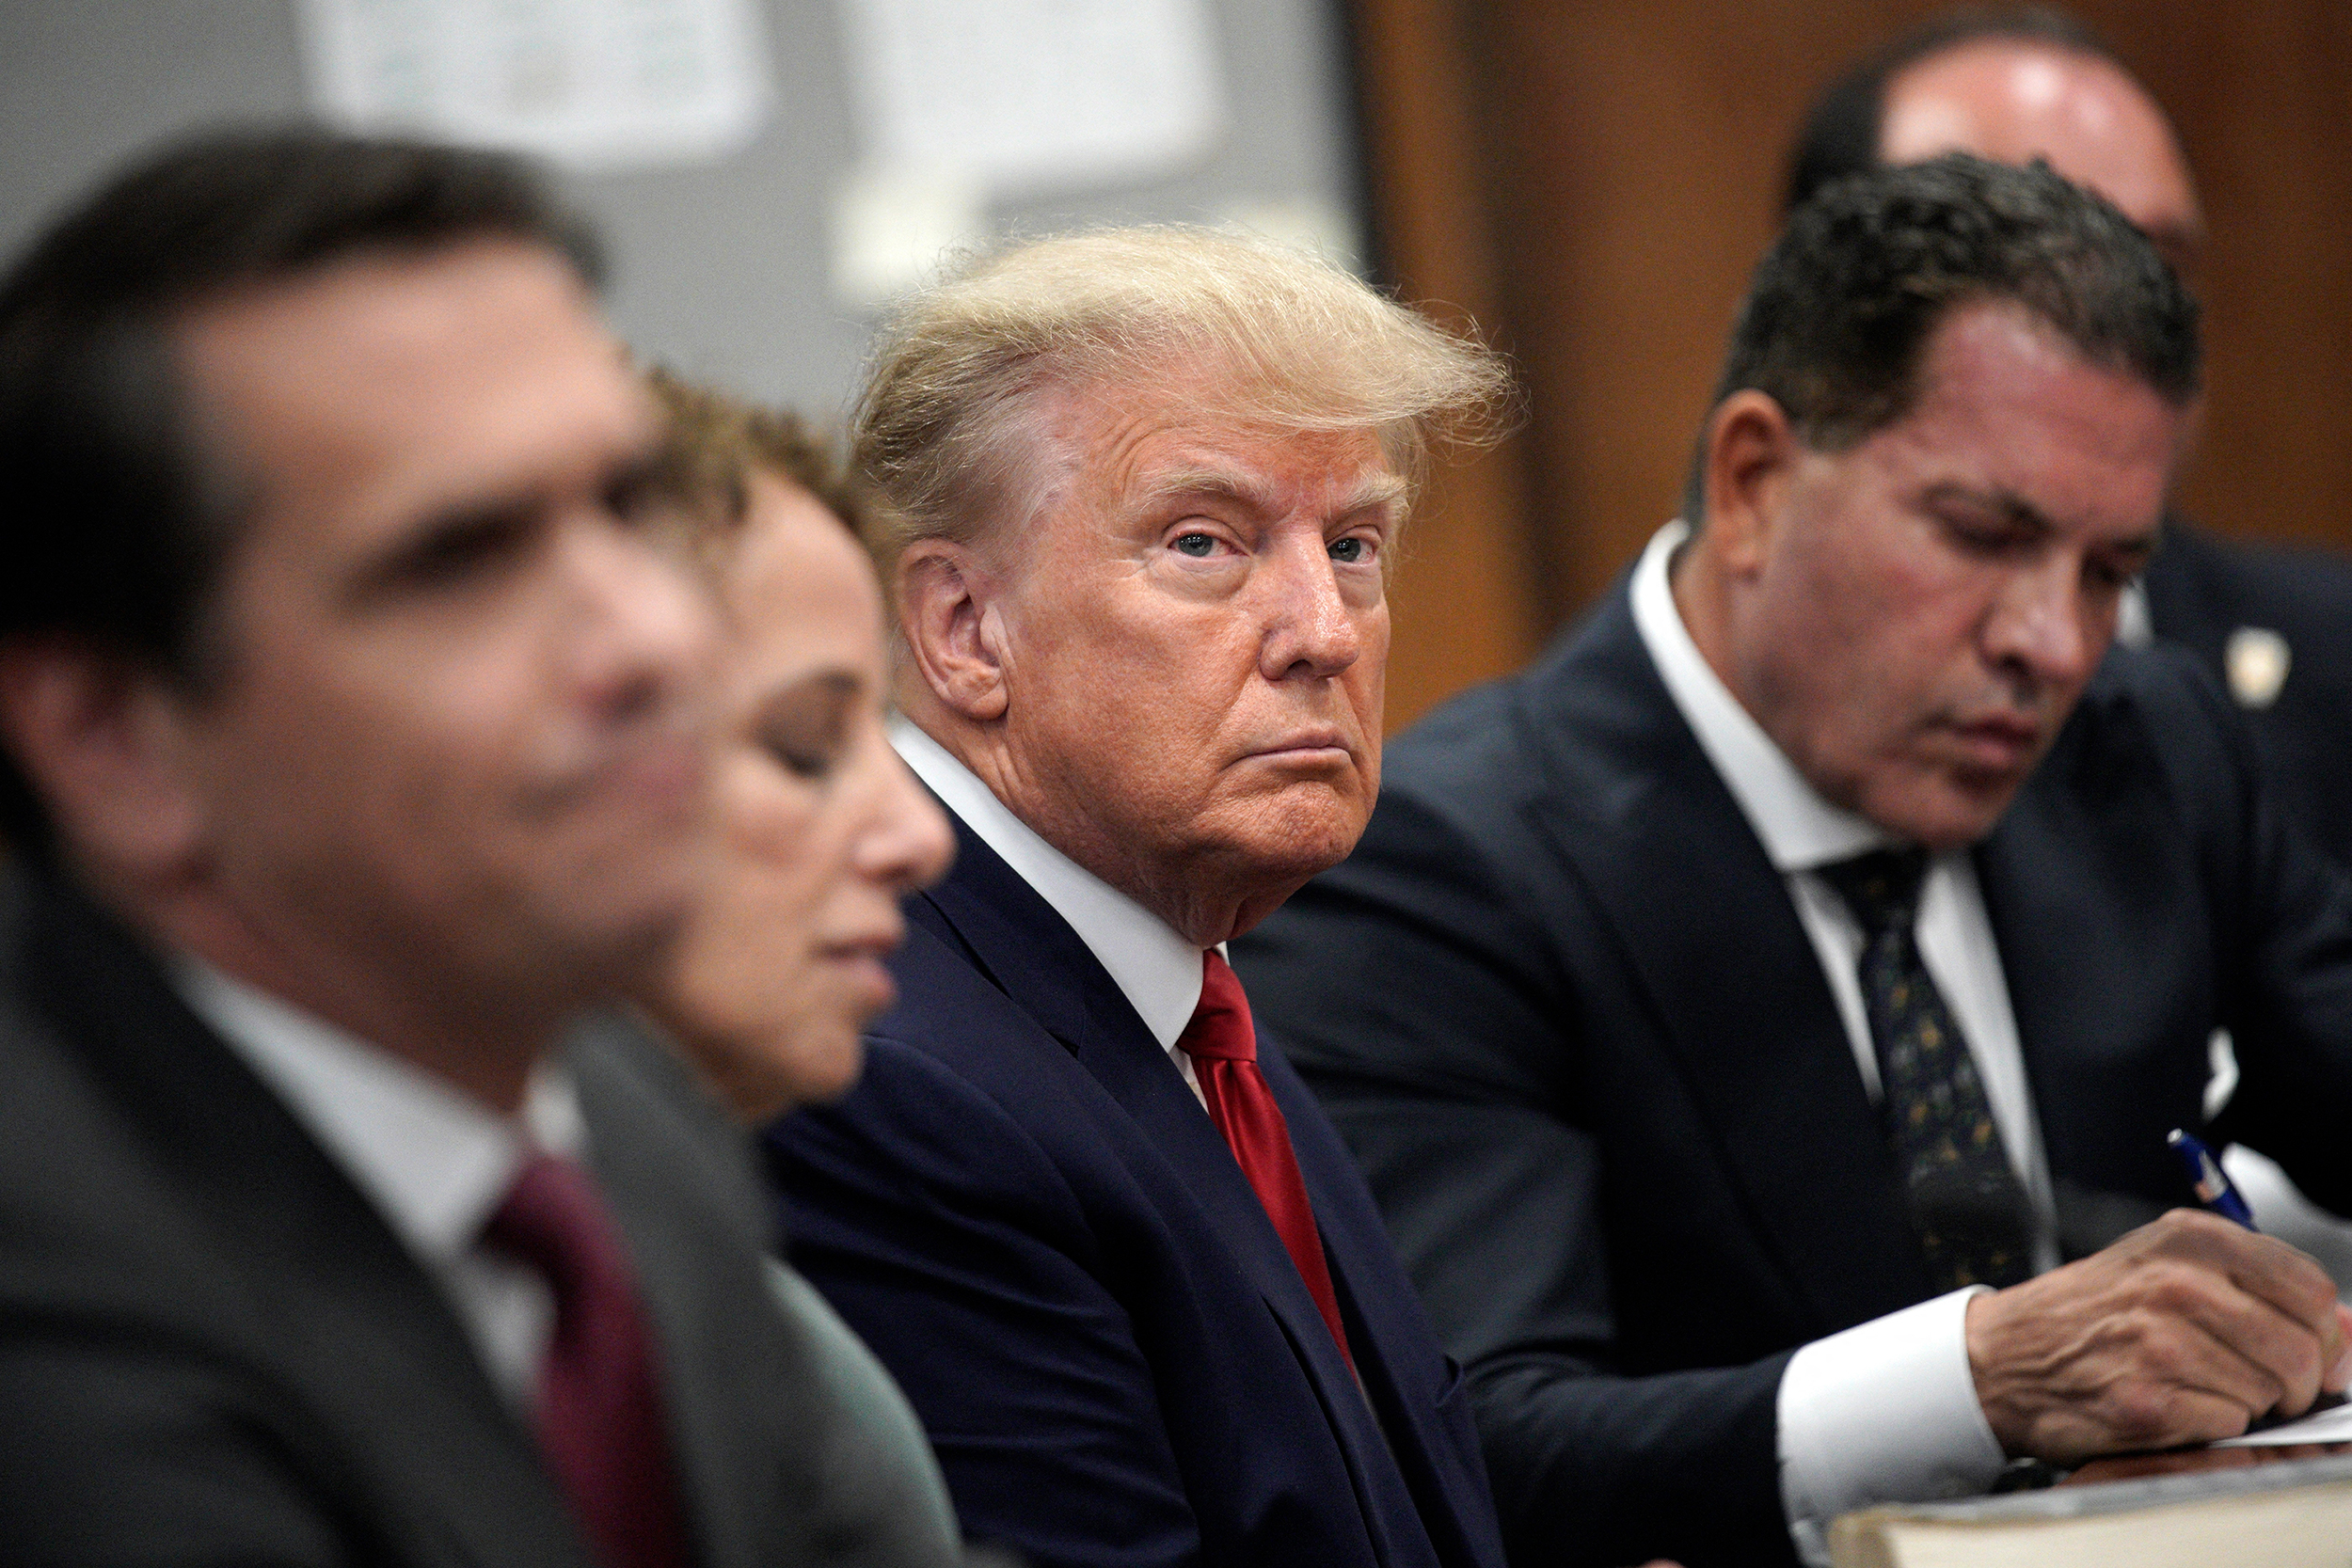 Former U.S. President Donald Trump appears in court with members of his legal team for an arraignment on charges stemming from his indictment by a Manhattan grand jury following a probe into hush money paid to porn star Stormy Daniels, in New York City on April 4, 2023.